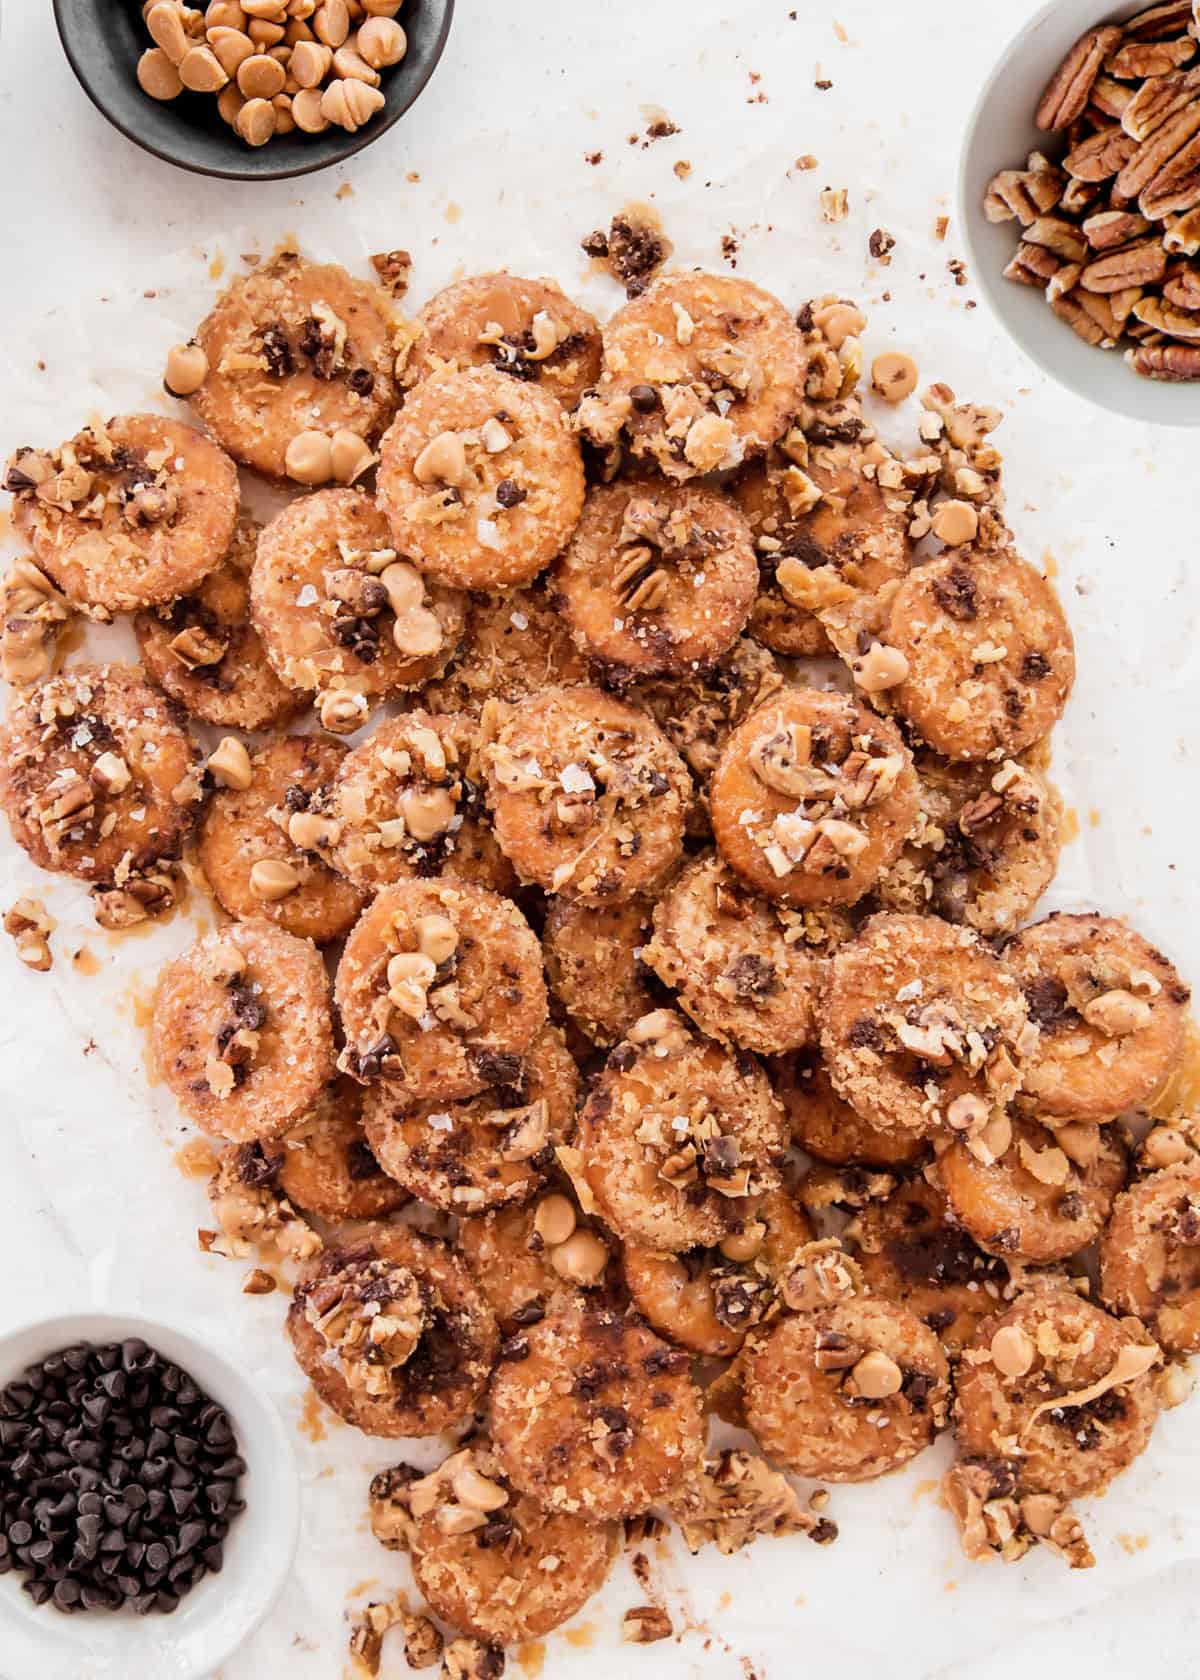 pile of Ritz cracker toffee on white background surrounded by bowls of peanut butter chips, chocolate chips, and pecans.